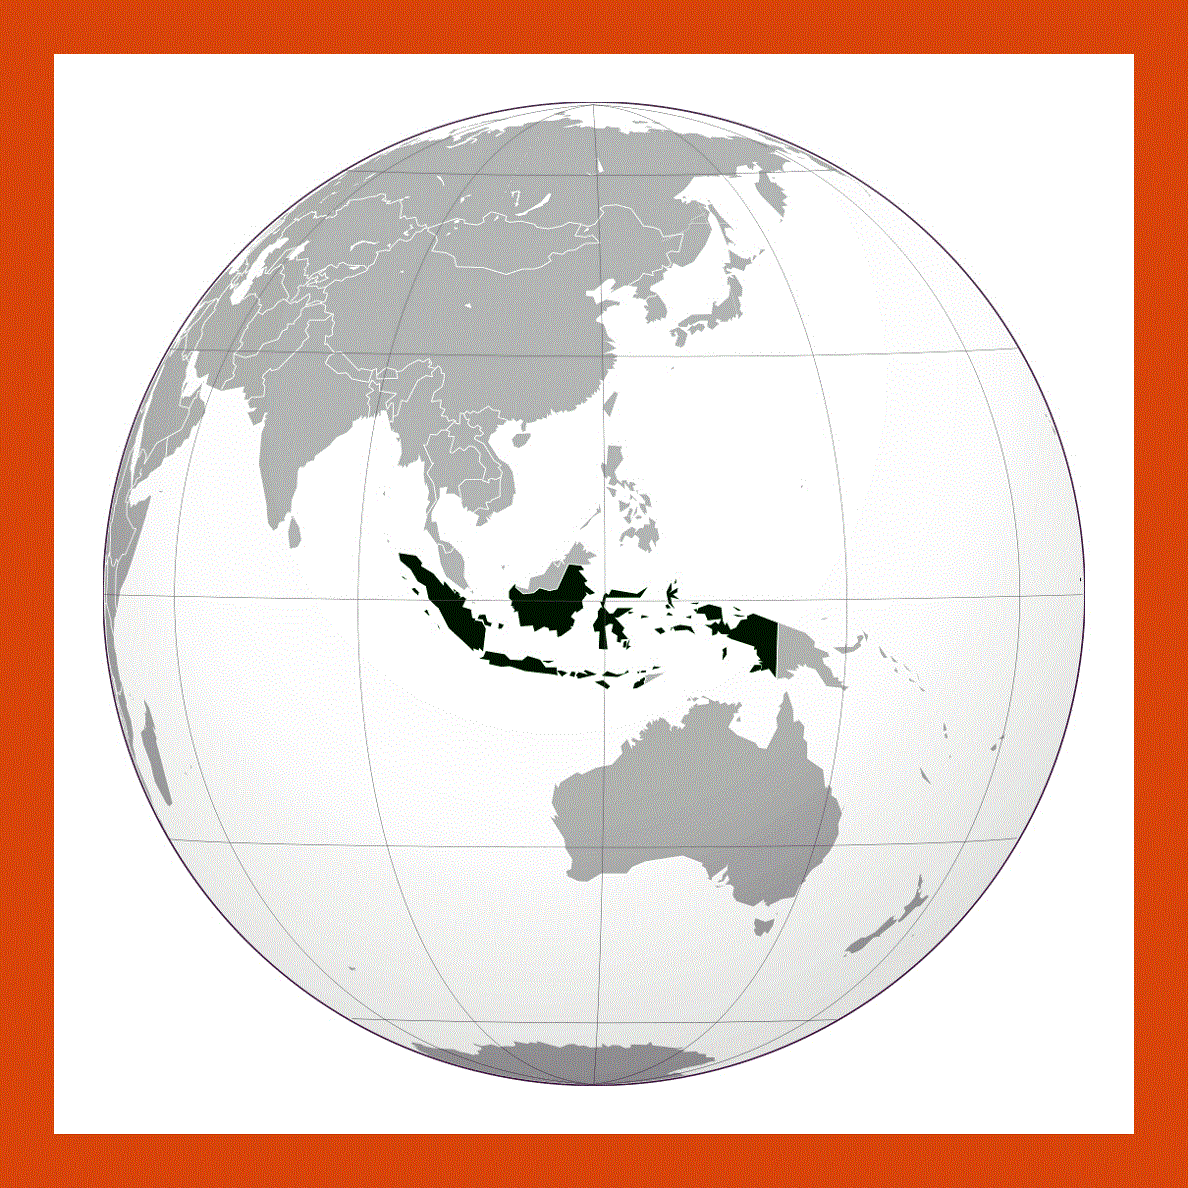 Location map of Indonesia